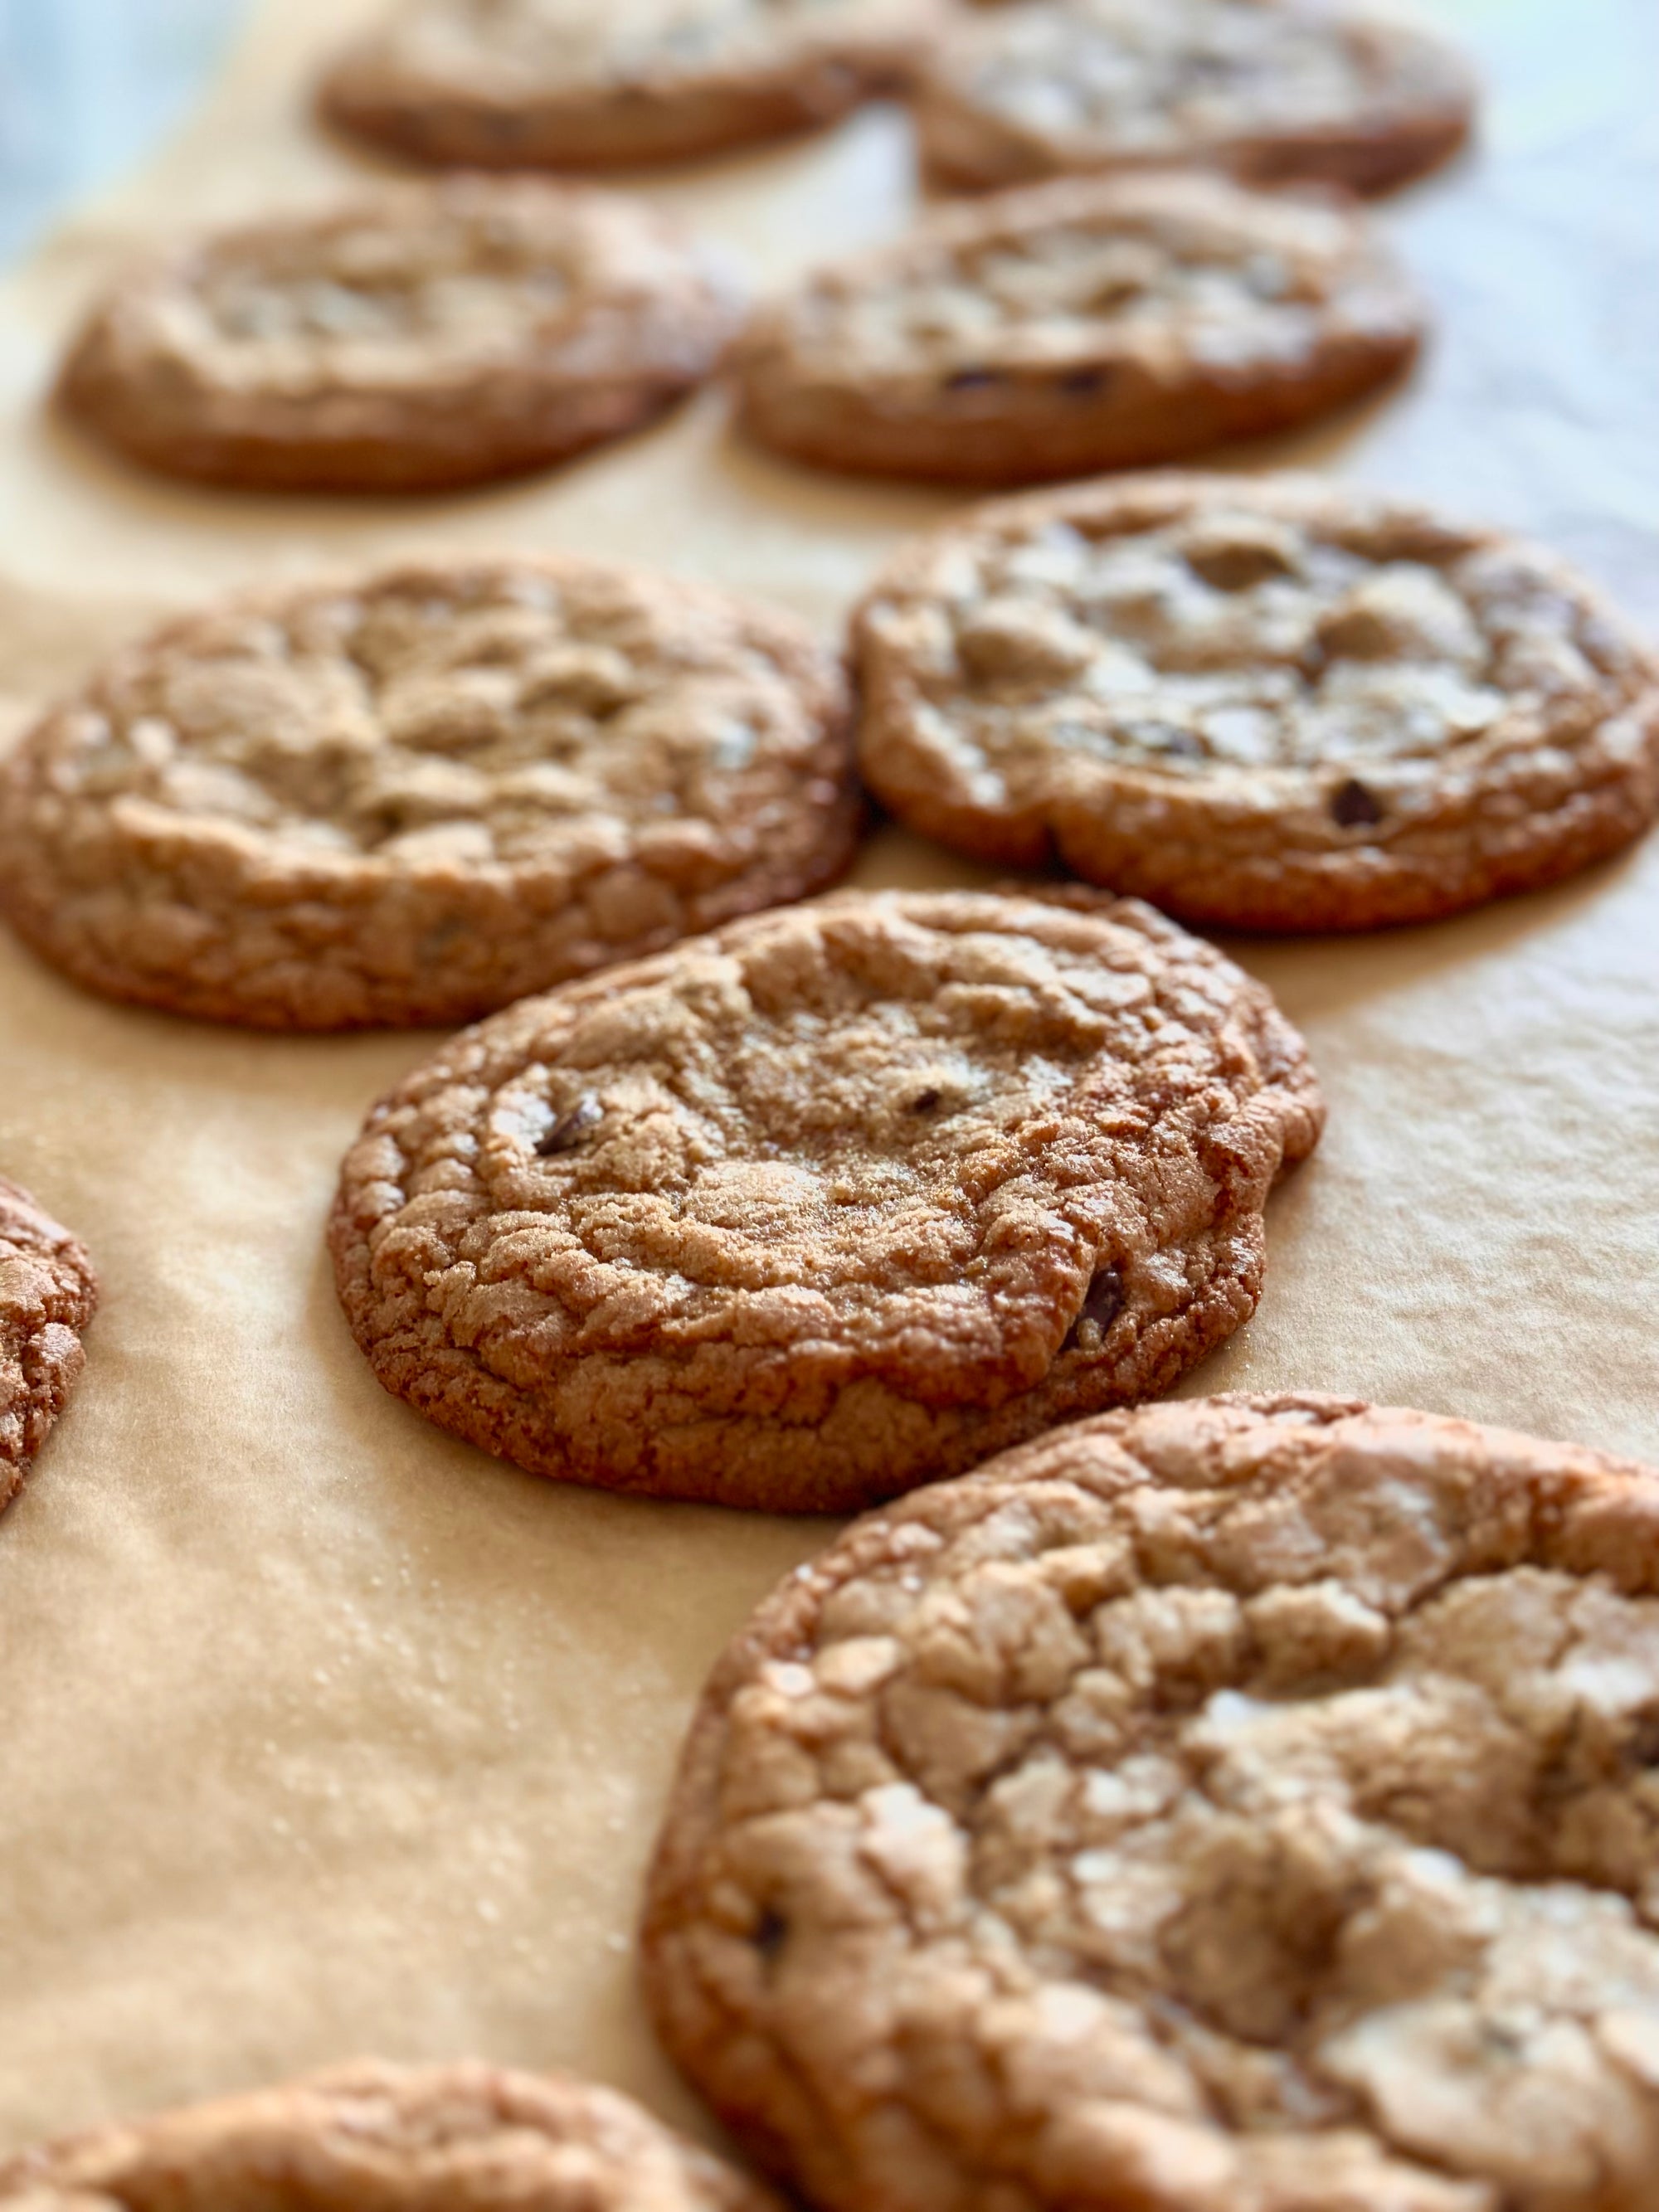 Let's Bake Irresistible Whole Wheat Chocolate Chip Cookies